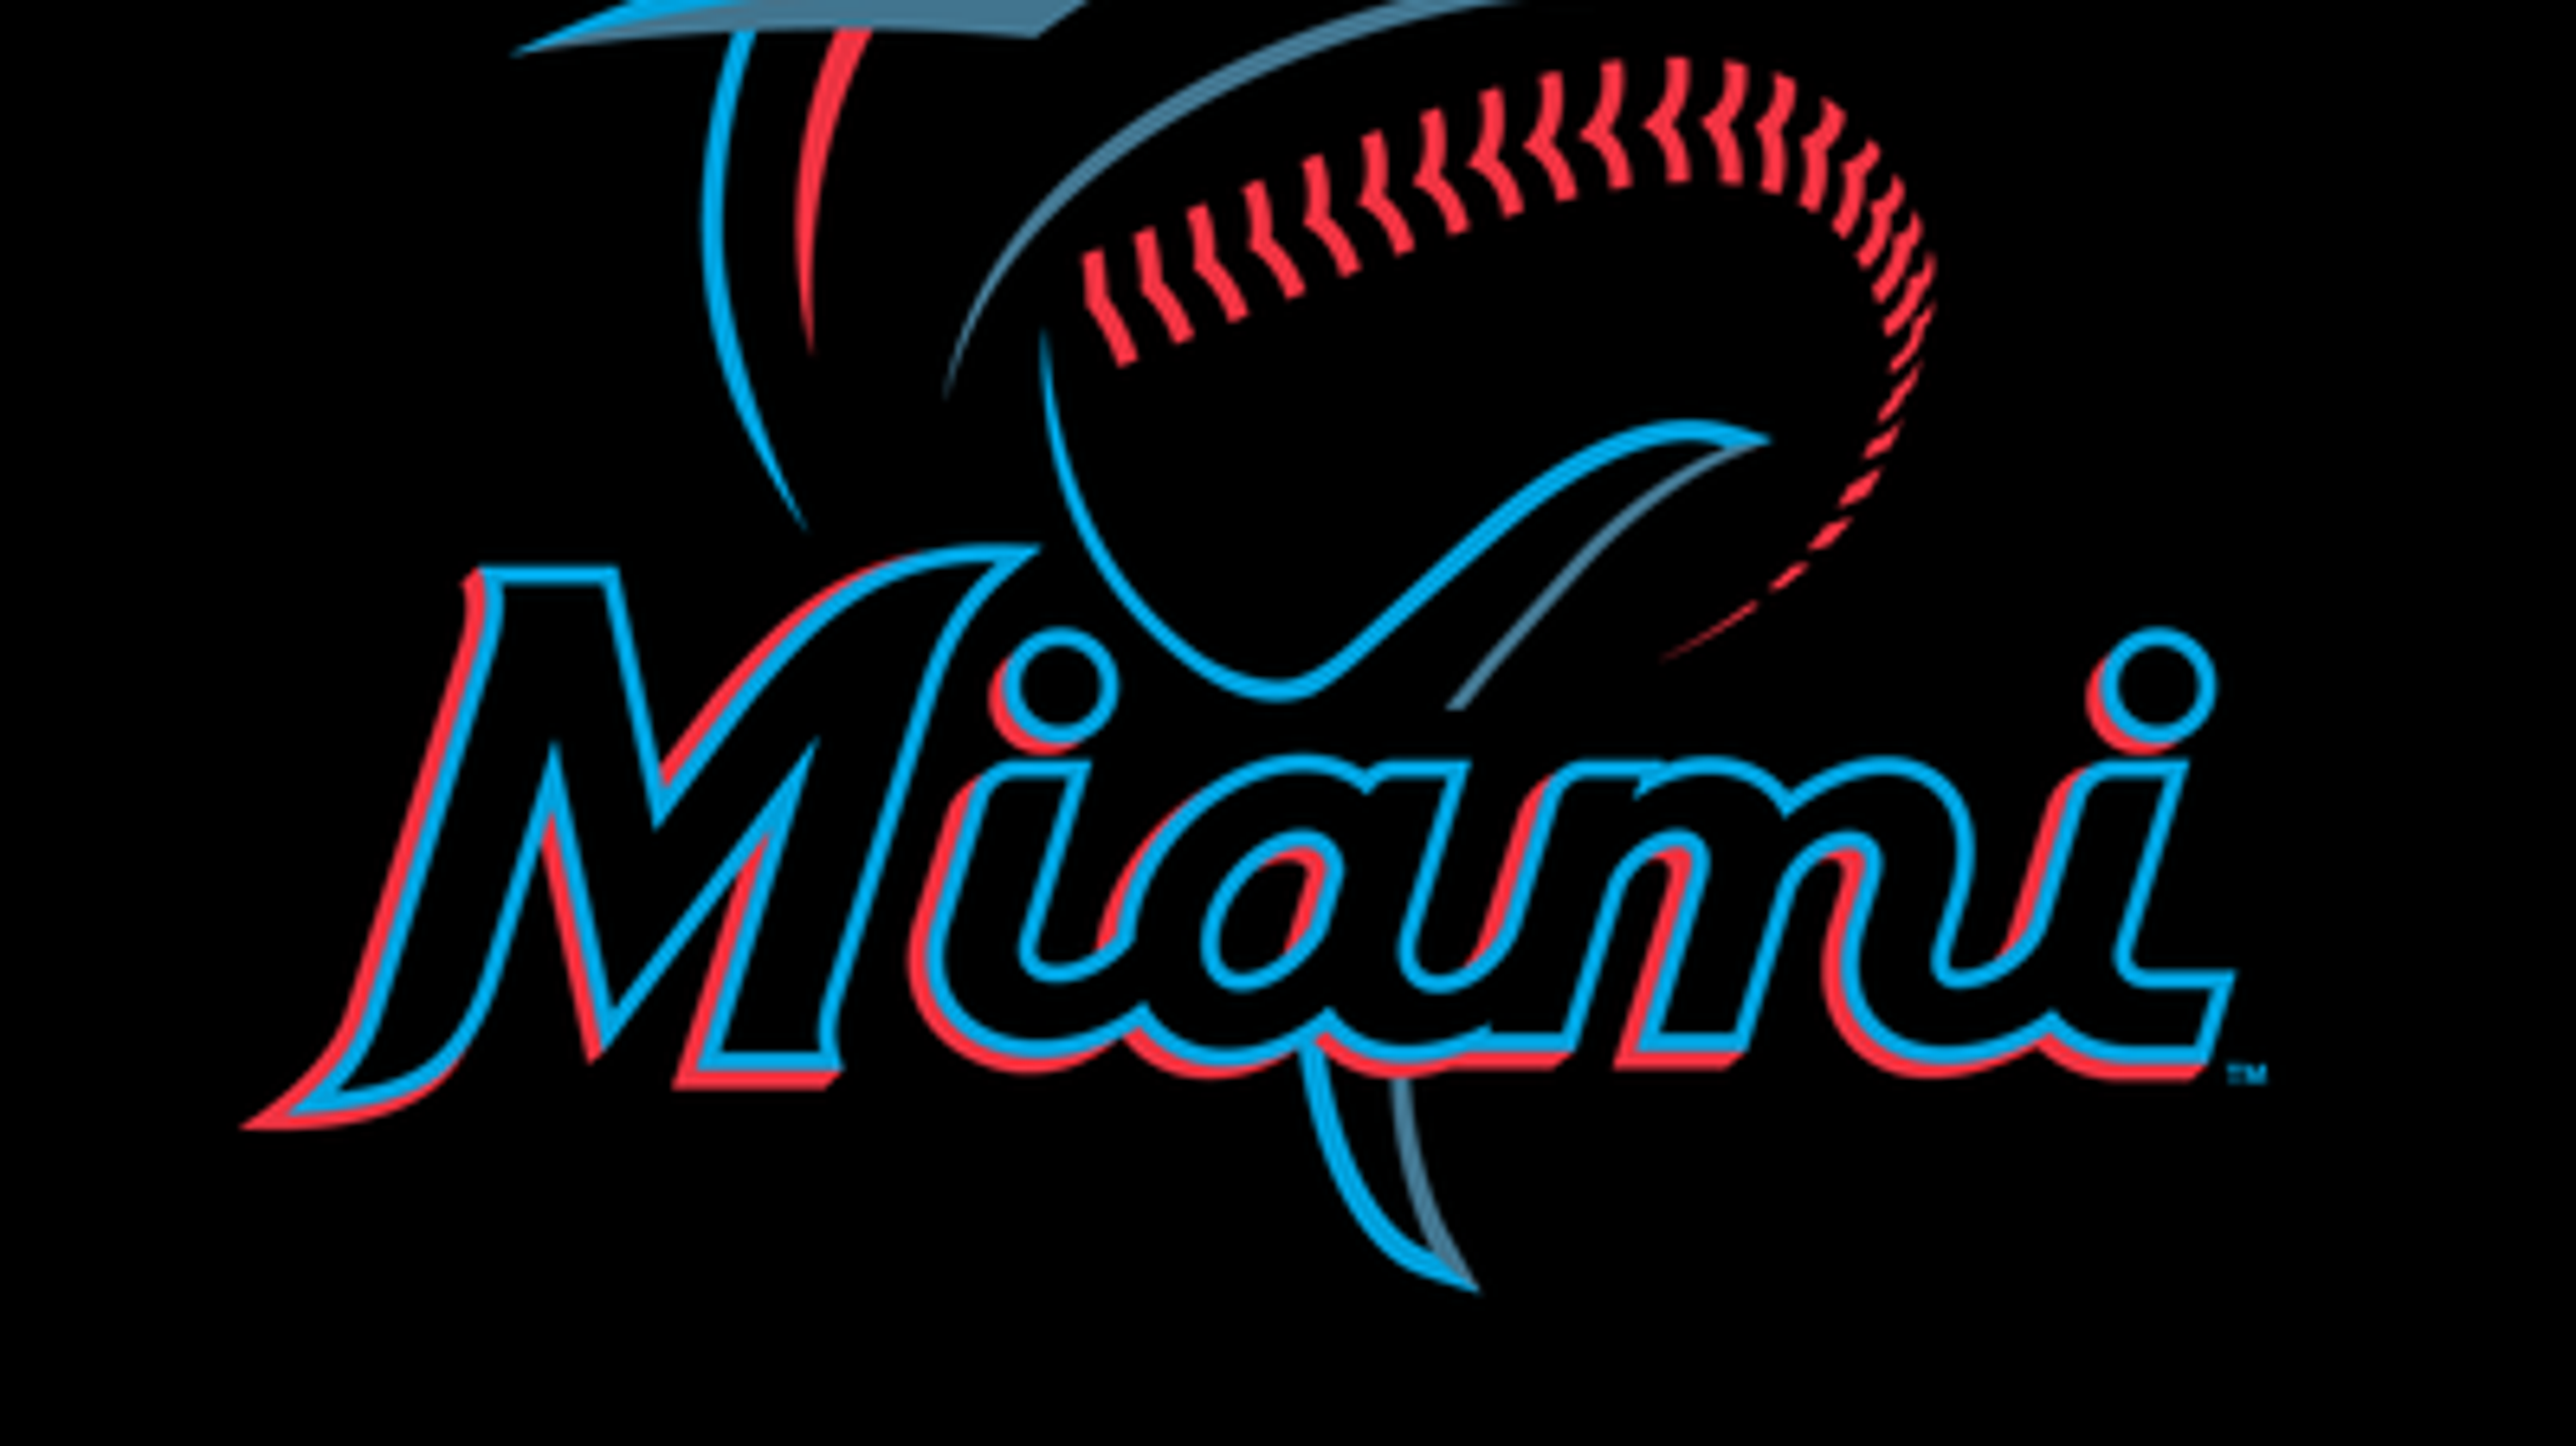 eb79a87b-62b3-4be6-a2ee-ce495aa61925-marlins_logo.png